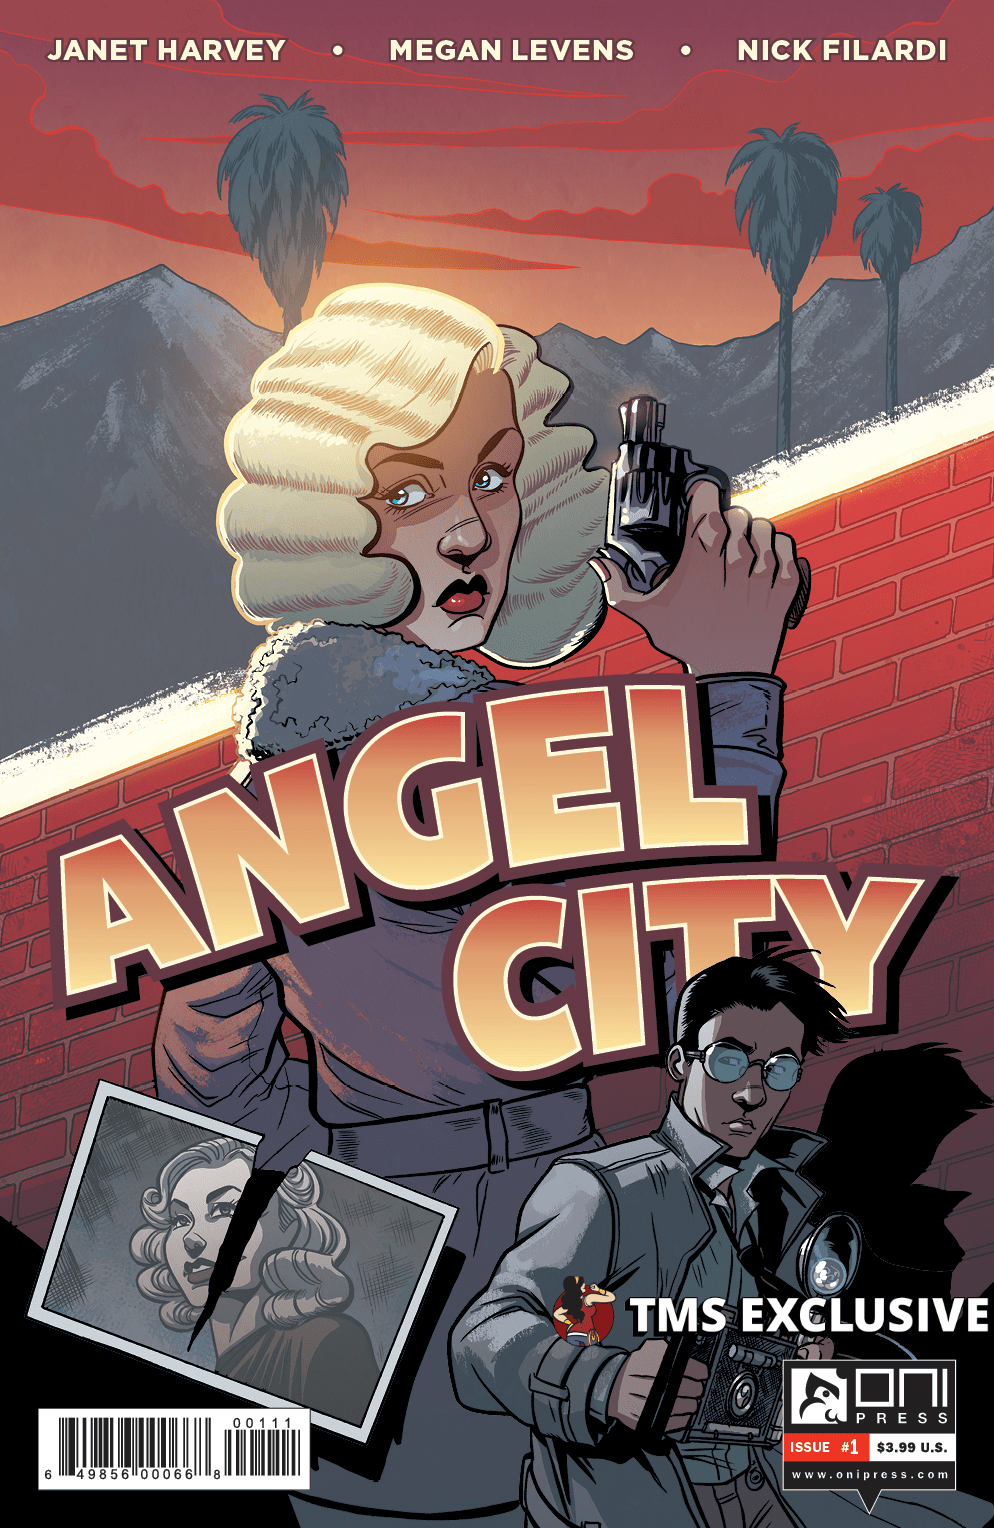 ANGELCITY #1 RETAIL COVER